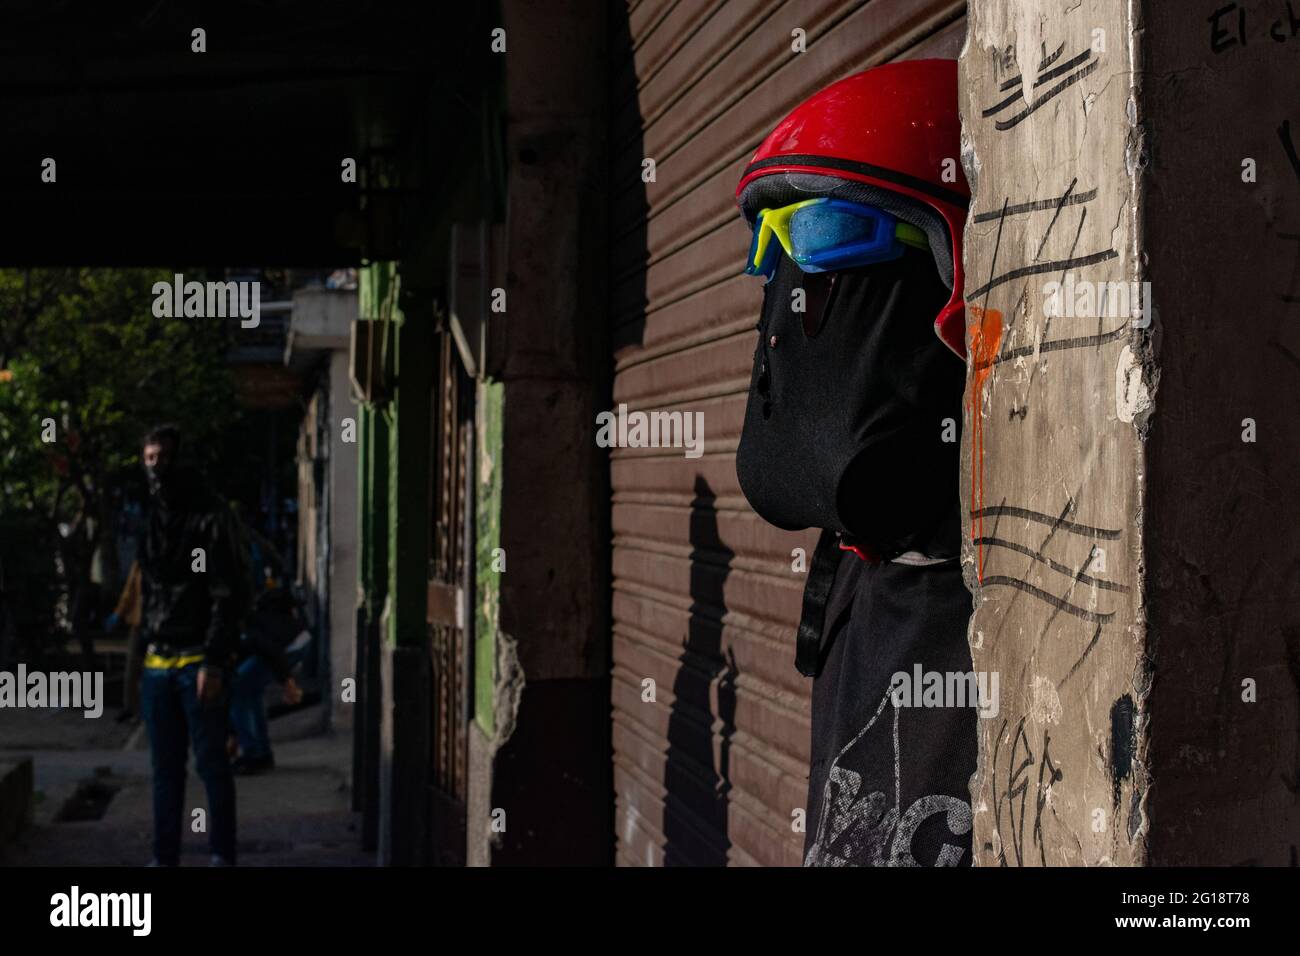 A demonstrator takes cover behind a wall as clashes between demonstrators and Colombia's riot police (ESMAD) erupt in Medellín, Colombia after several weeks of anti-government protest against President Ivan Duque's tax and health reforms and unrest and abuse of authority cases that leave at least 70 dead according to NGOs on June 4, 2021. Stock Photo